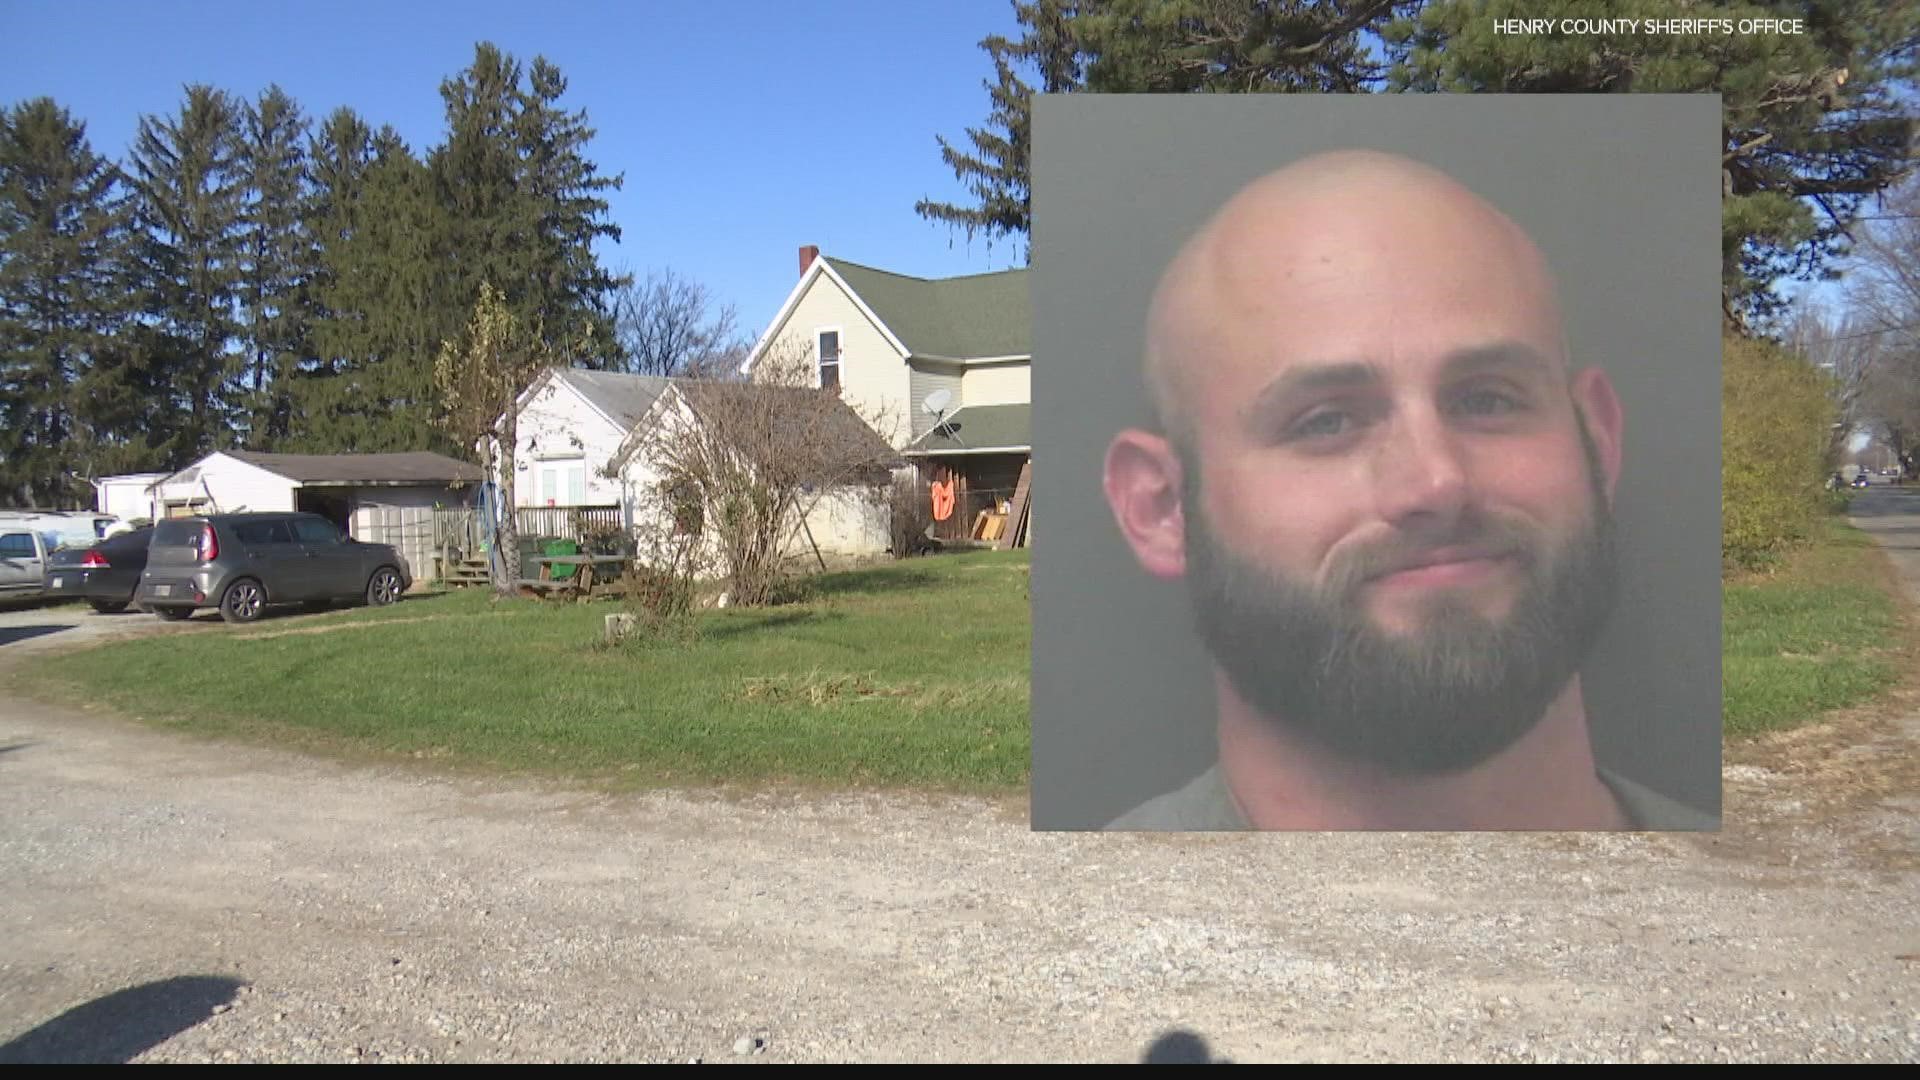 Police believe 34-year-old Benjamin Petry knocked on a door at this home in Kennard about 11:30 pm Monday night.